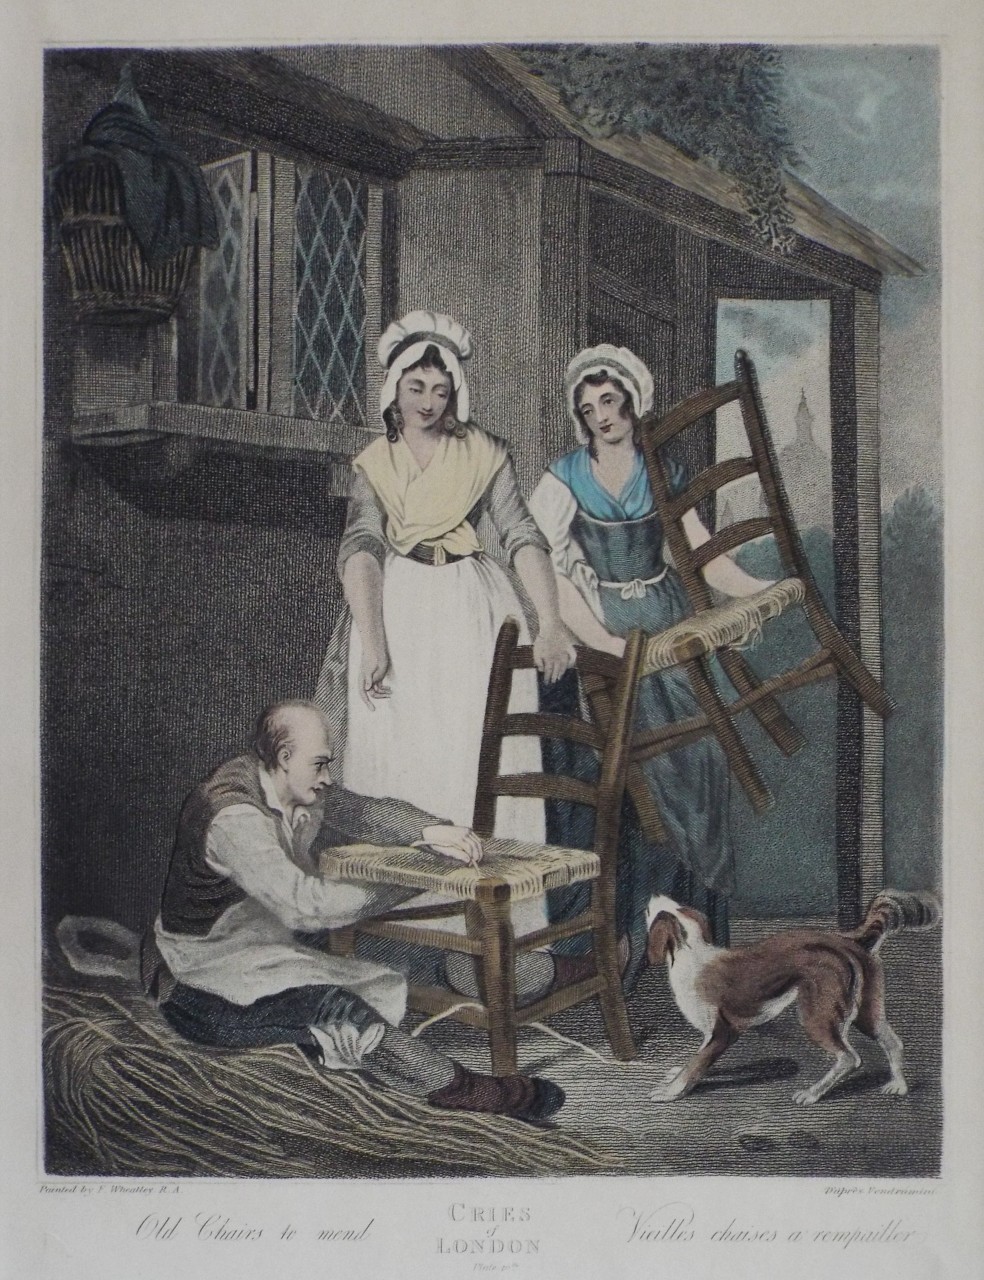 Lithograph - Cries of London Plate 10: Old Chairs to mend.
Vielles chaises a rempailler. - 